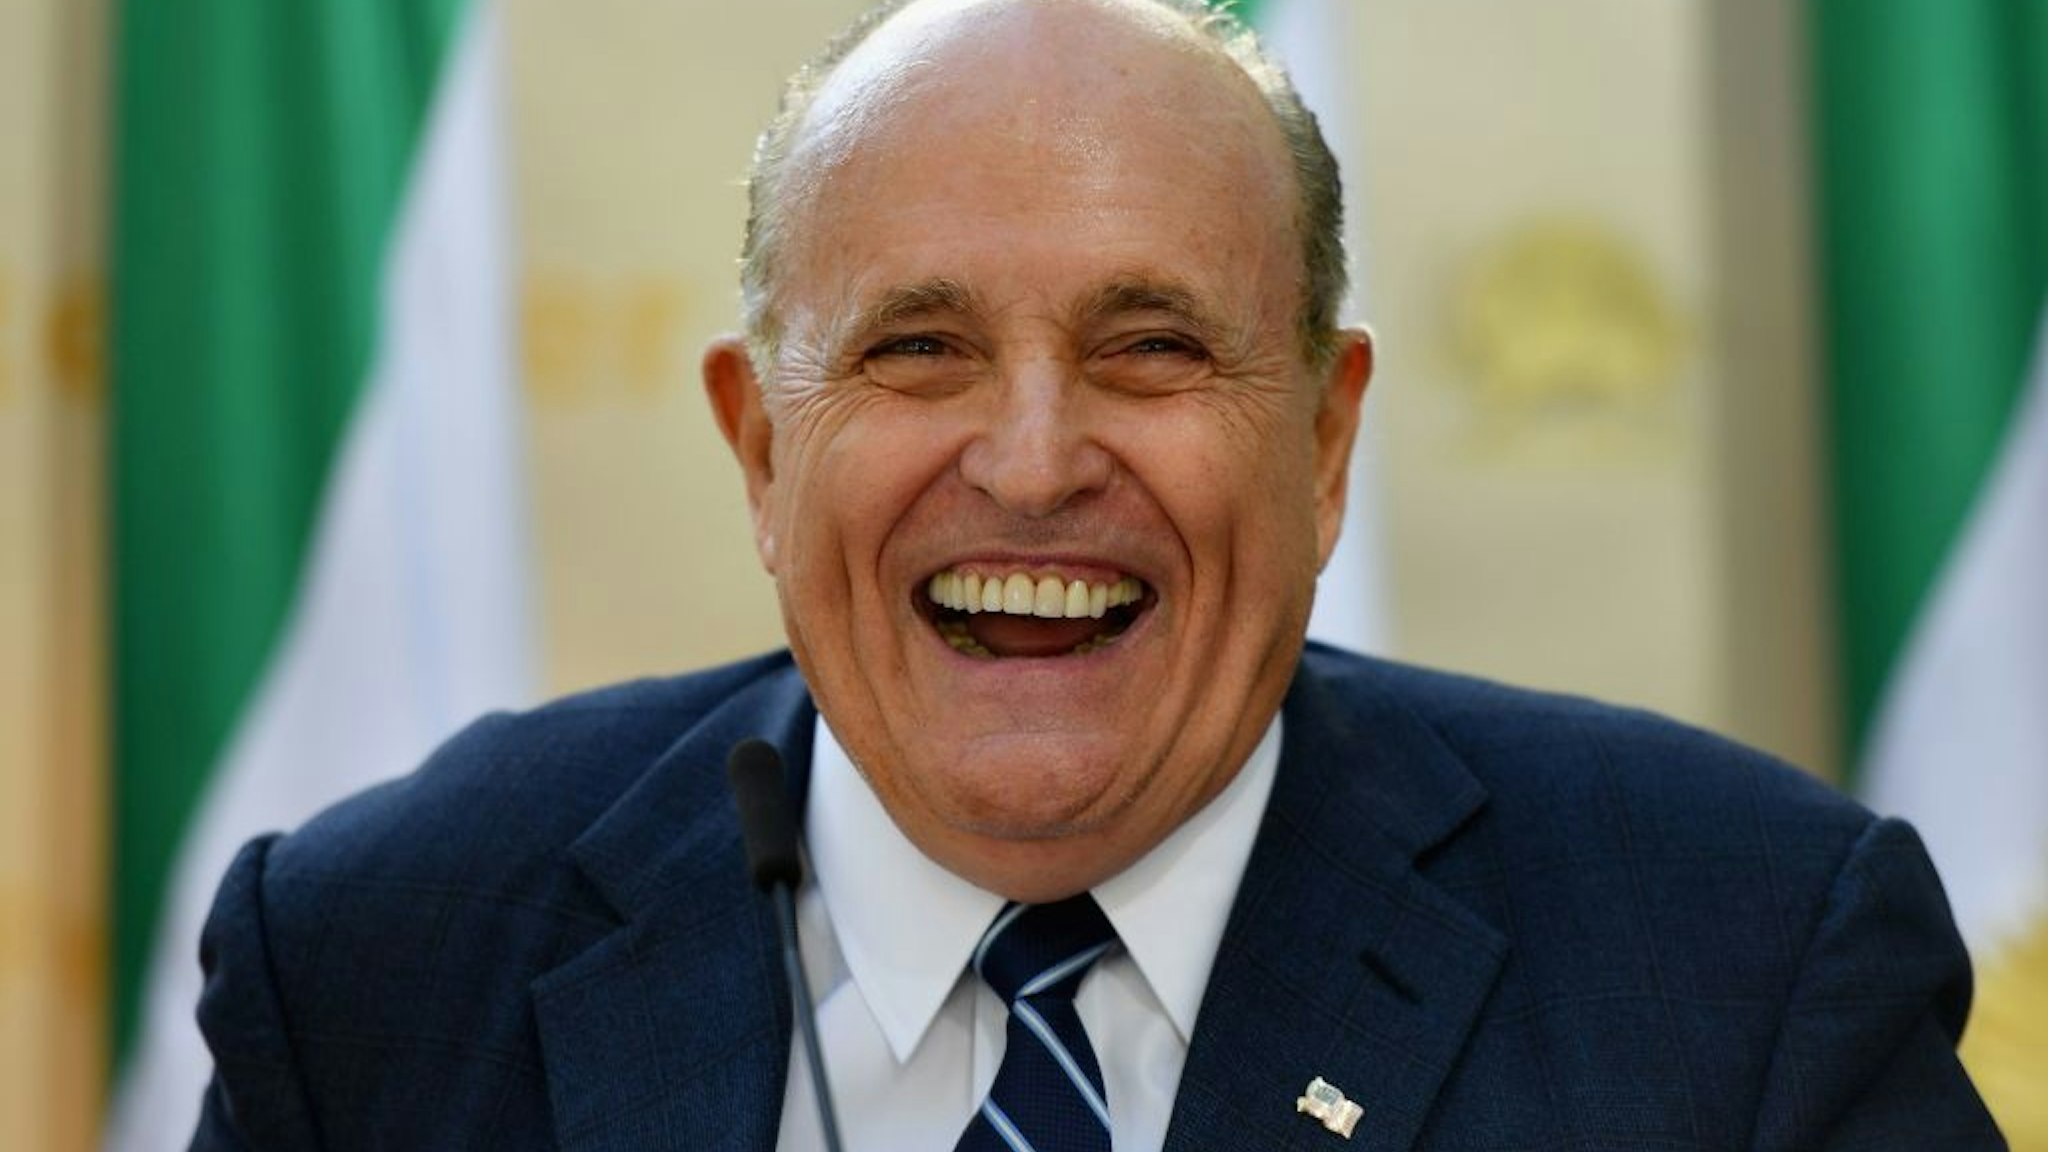 Rudy Giuliani, Former Mayor of New York City speaks to the Organization of Iranian American Communities during their march to urge "recognition of the Iranian people's right for regime change," outside the United Nations Headquarters in New York on September 24, 2019. - They urged recognition of the Iranian people's right for regime change and declared their support for the leader of democratic opposition, Maryam Rajavi.